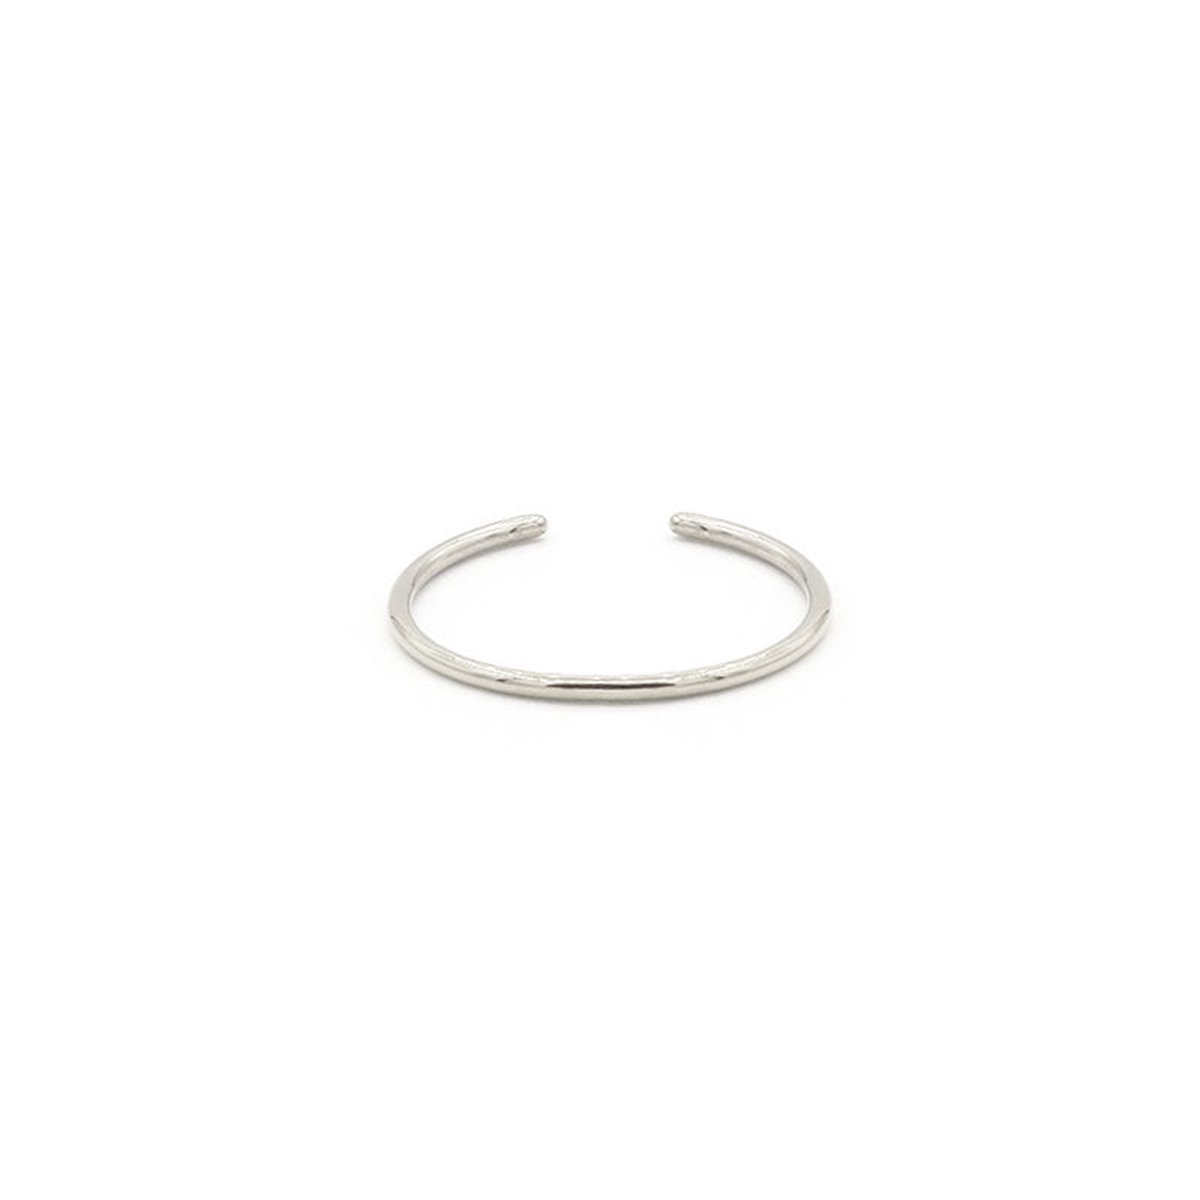 Mint15 Verstelbare ring 'Tiny stacking ring' - Zilver RVS/Stainless Steel